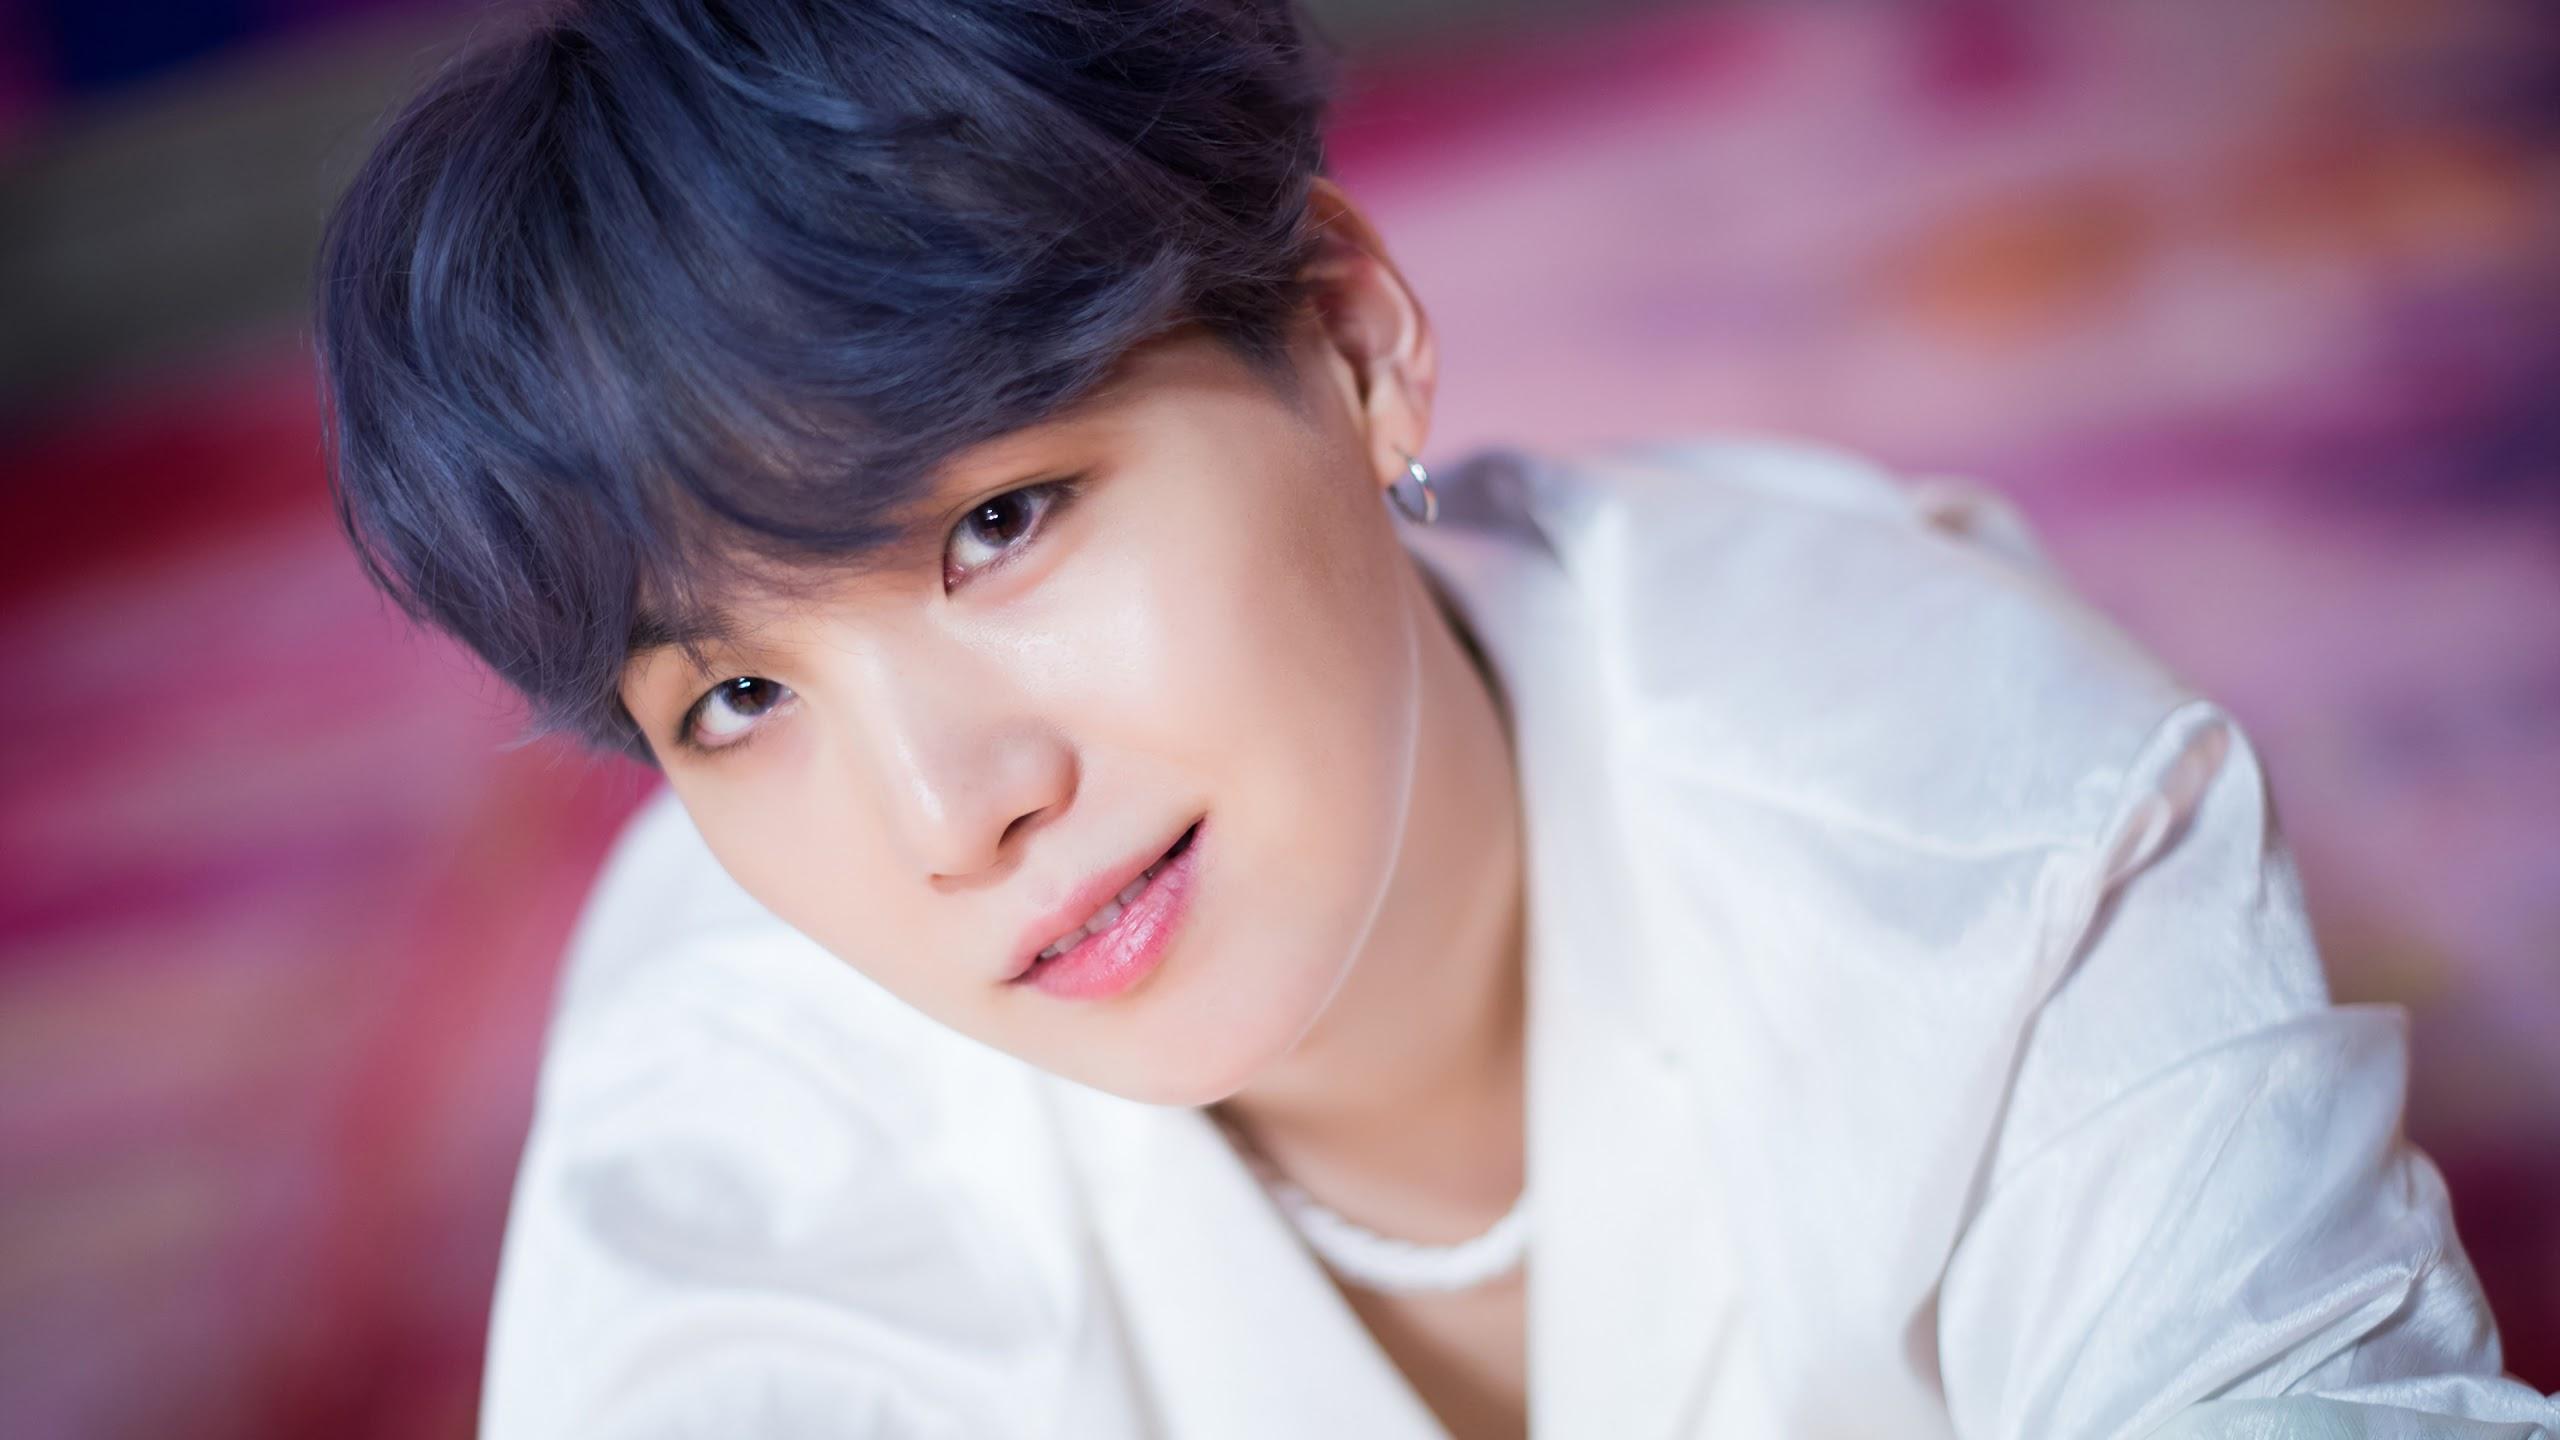 BTS Suga's Blue Hair in "Boy With Luv" Music Video - wide 3